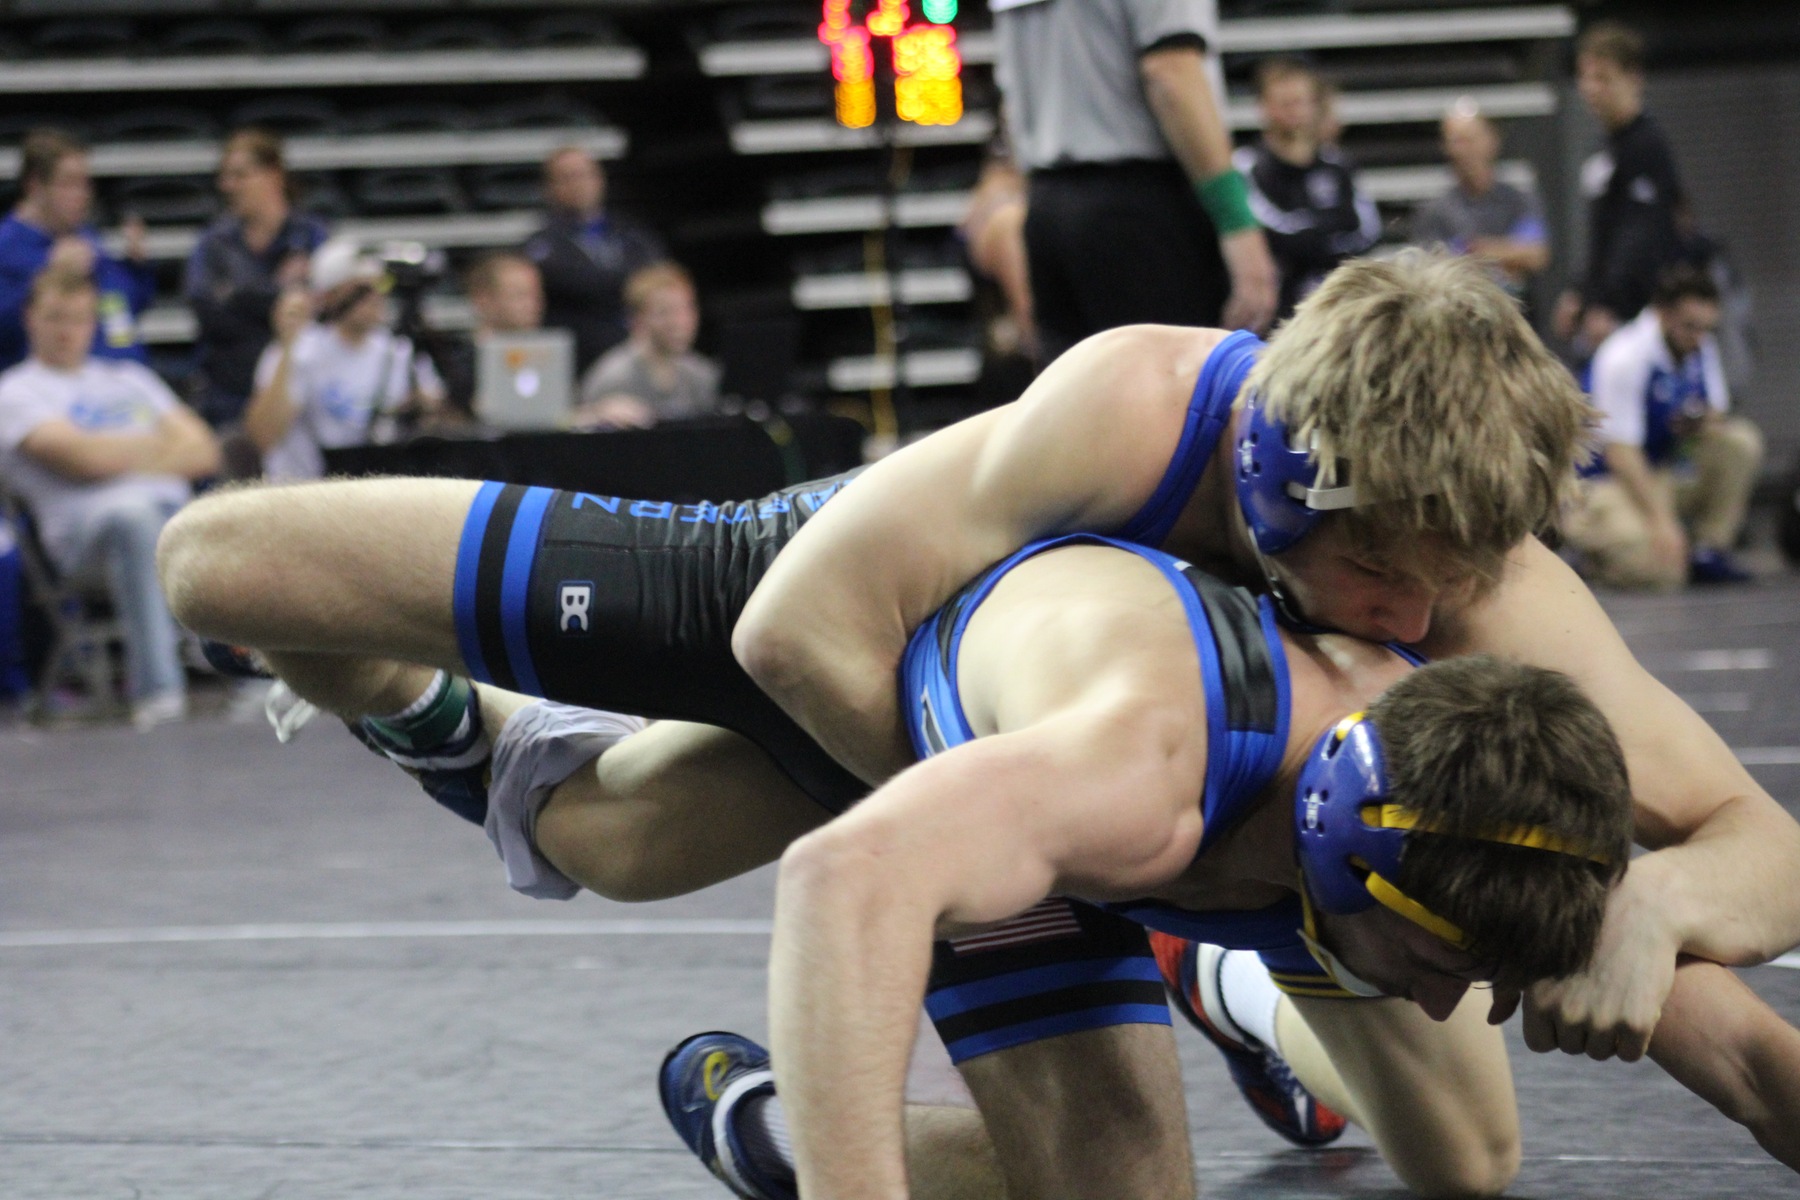 NIACC's Austin Anderly gets the takedown against NEO's Cody Karstetter in their 141-pound quarterfinal match Friday night at national tournament.